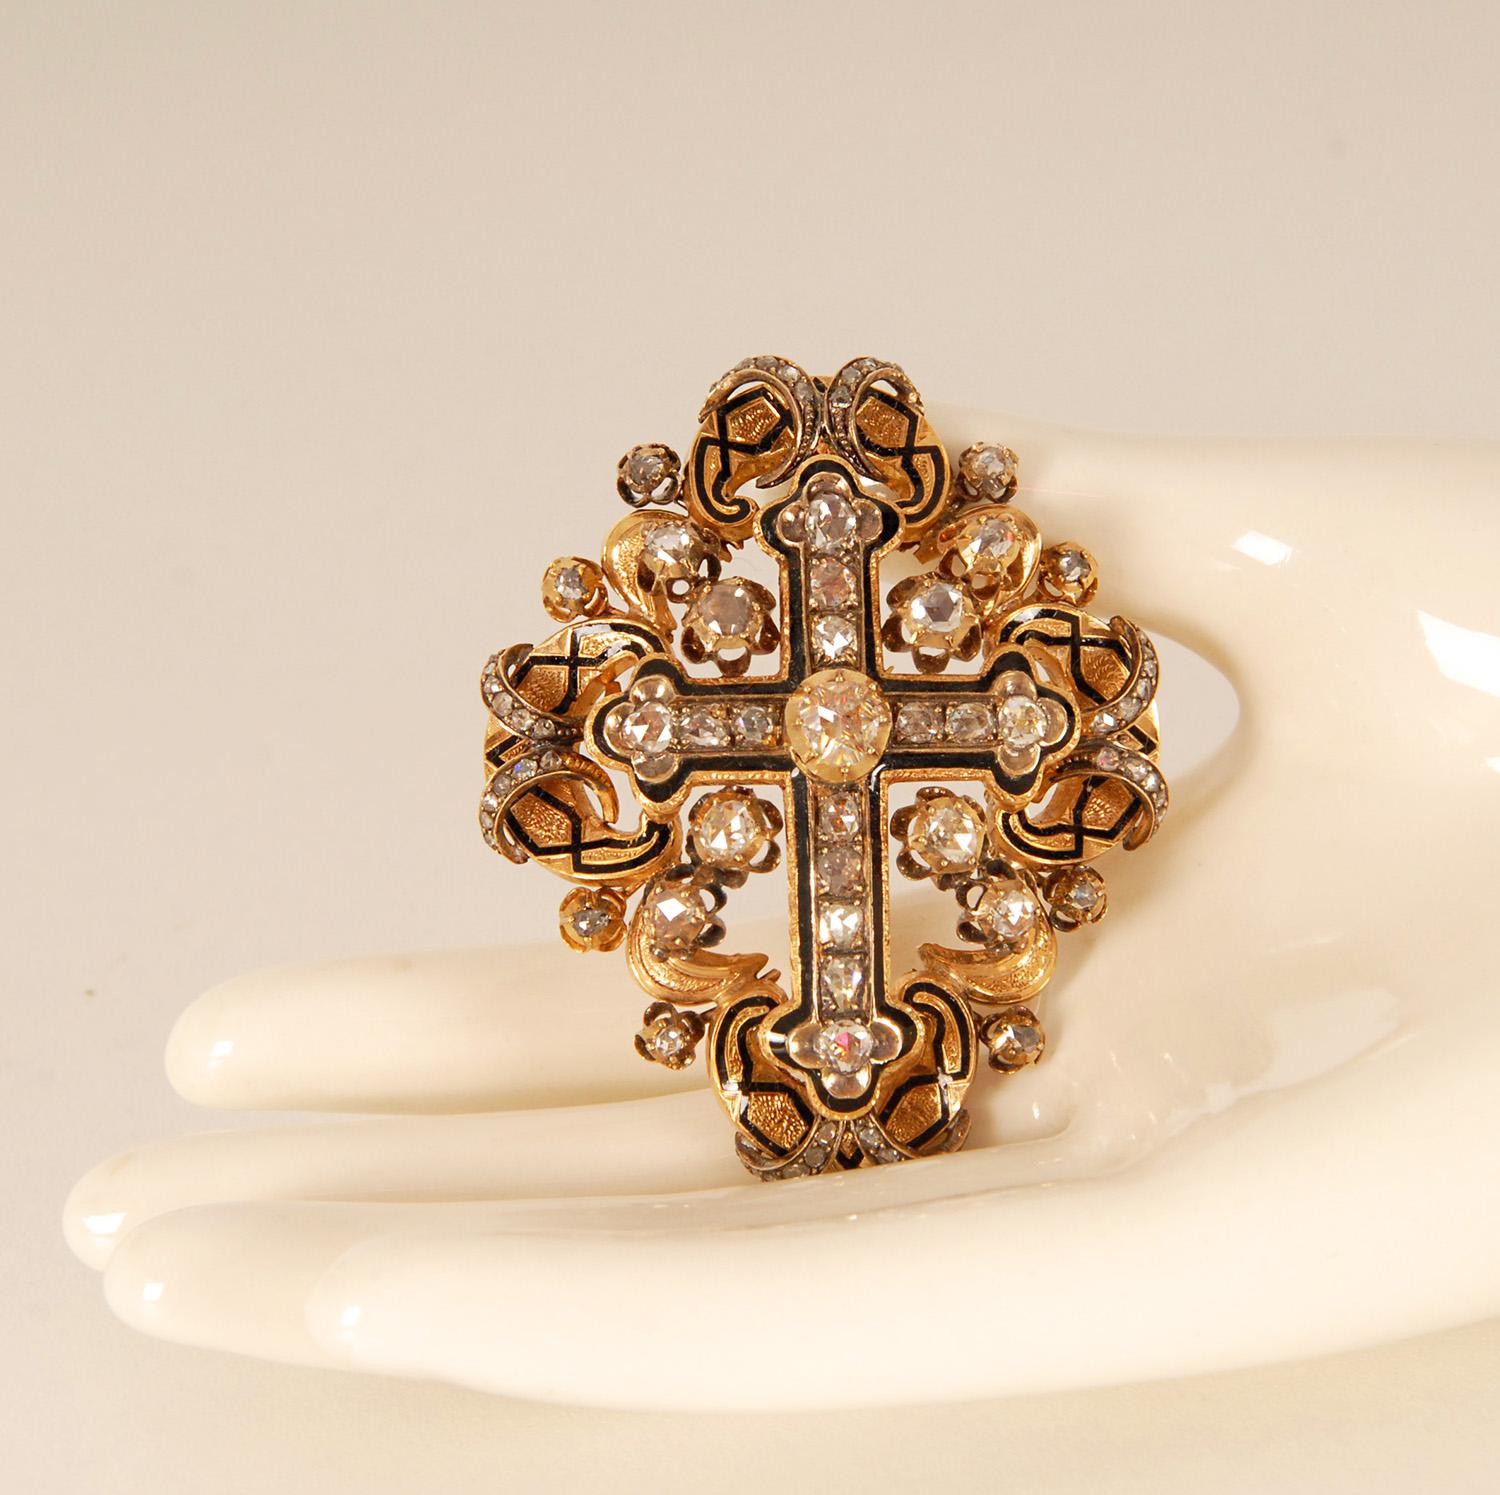 Antique Gold Renaissance Revival cross with rose cut diamond and enamel.
Design: In the style of Carlo Giuliano, Robert Phillips, Charles Duron, Bailey Banks & Biddle
Style: Renaissance, Antique, Napoleon III, Victorian
Material: 18K gold, 79